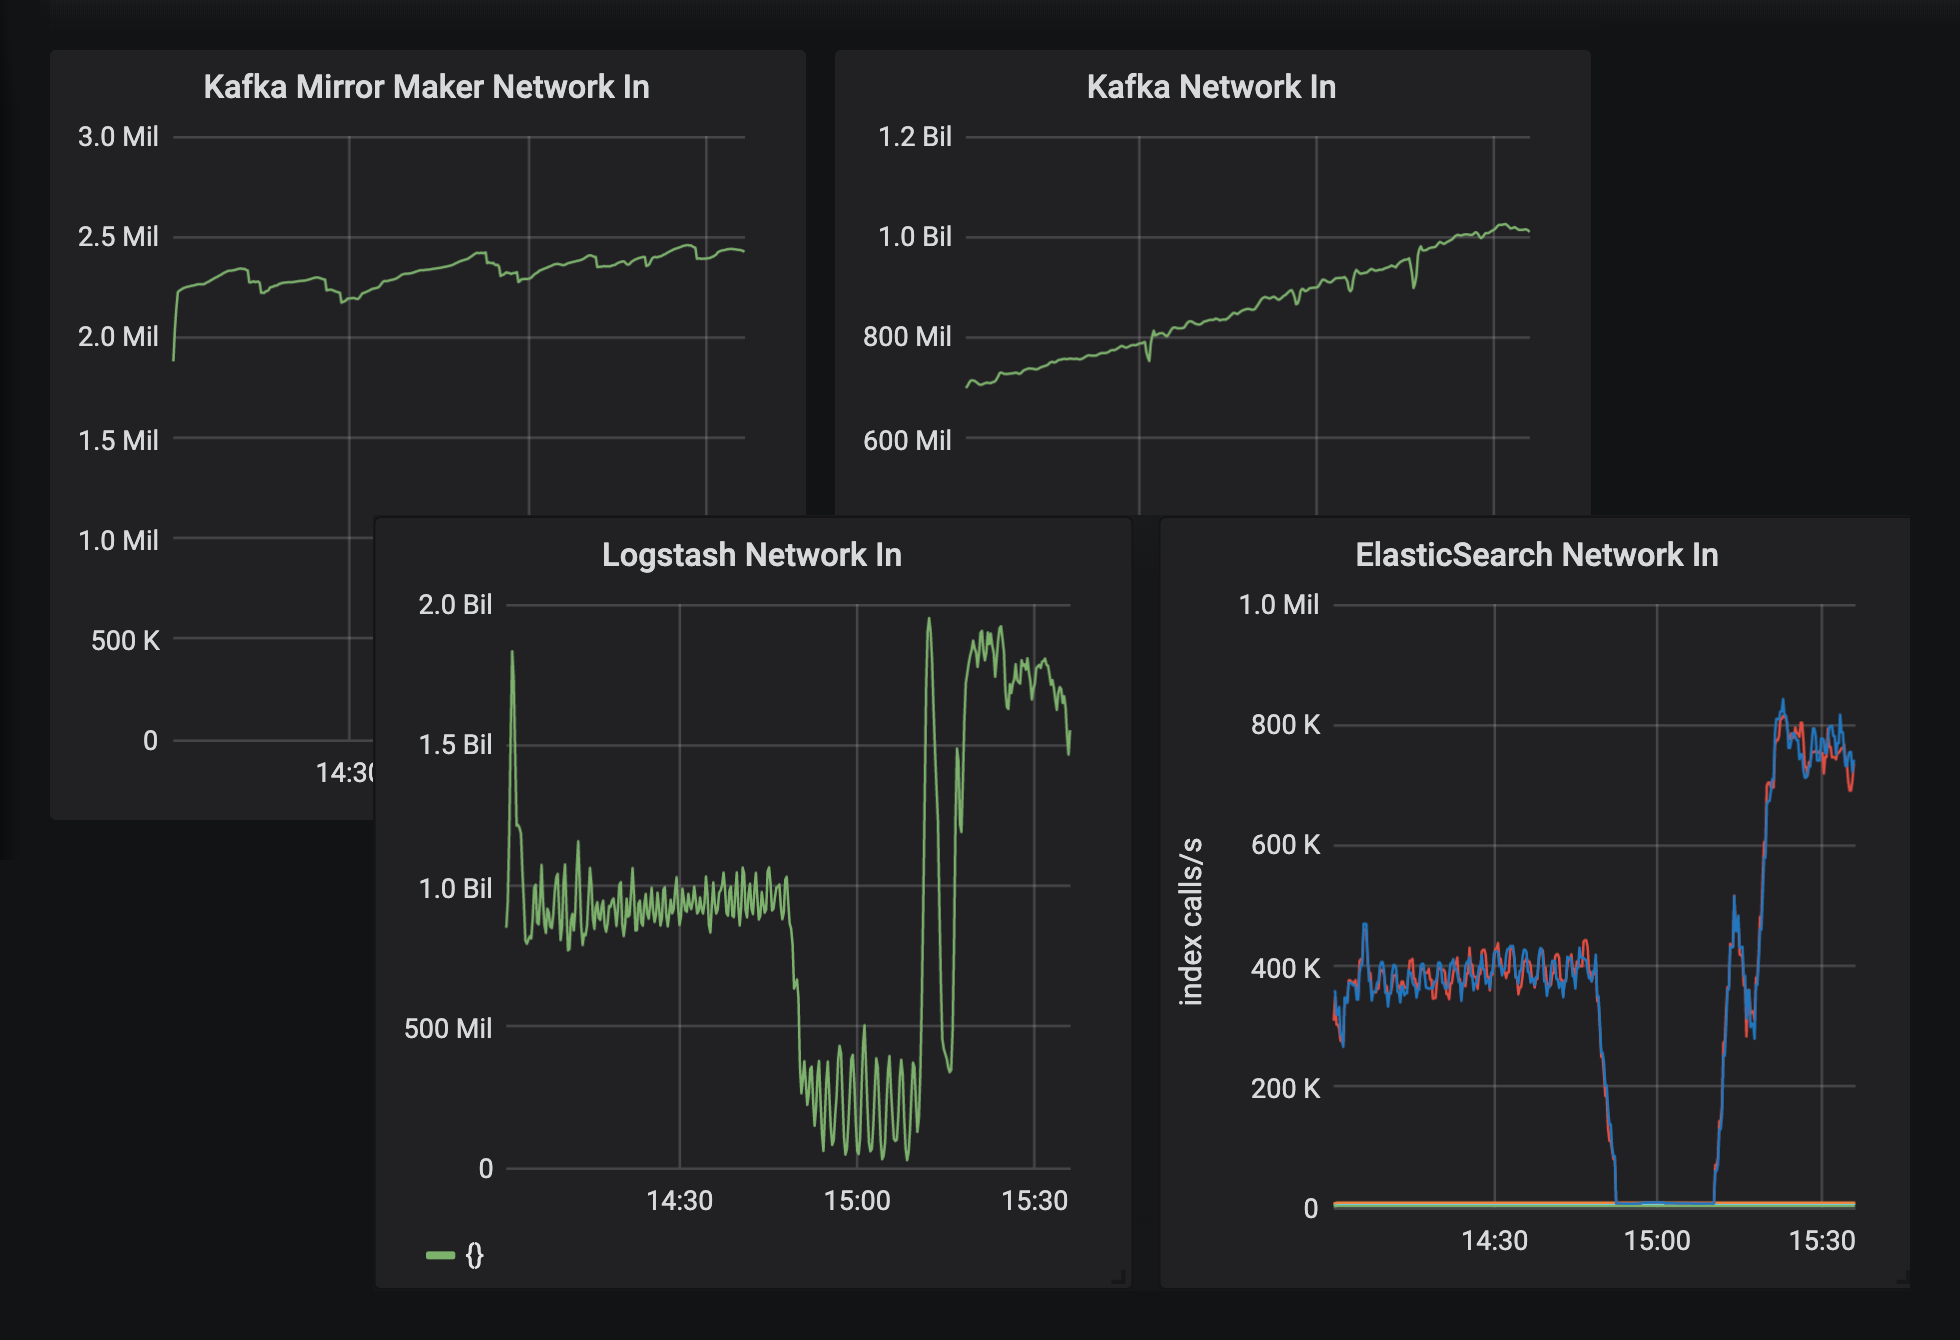 Chart I: due to a [preemptible event](https://cloud.google.com/compute/docs/instances/preemptible), logstash instances were turned off, causing a decrease in Elasticsearch indexing rate. In the dashboard, we can notice immediately which component is broken.